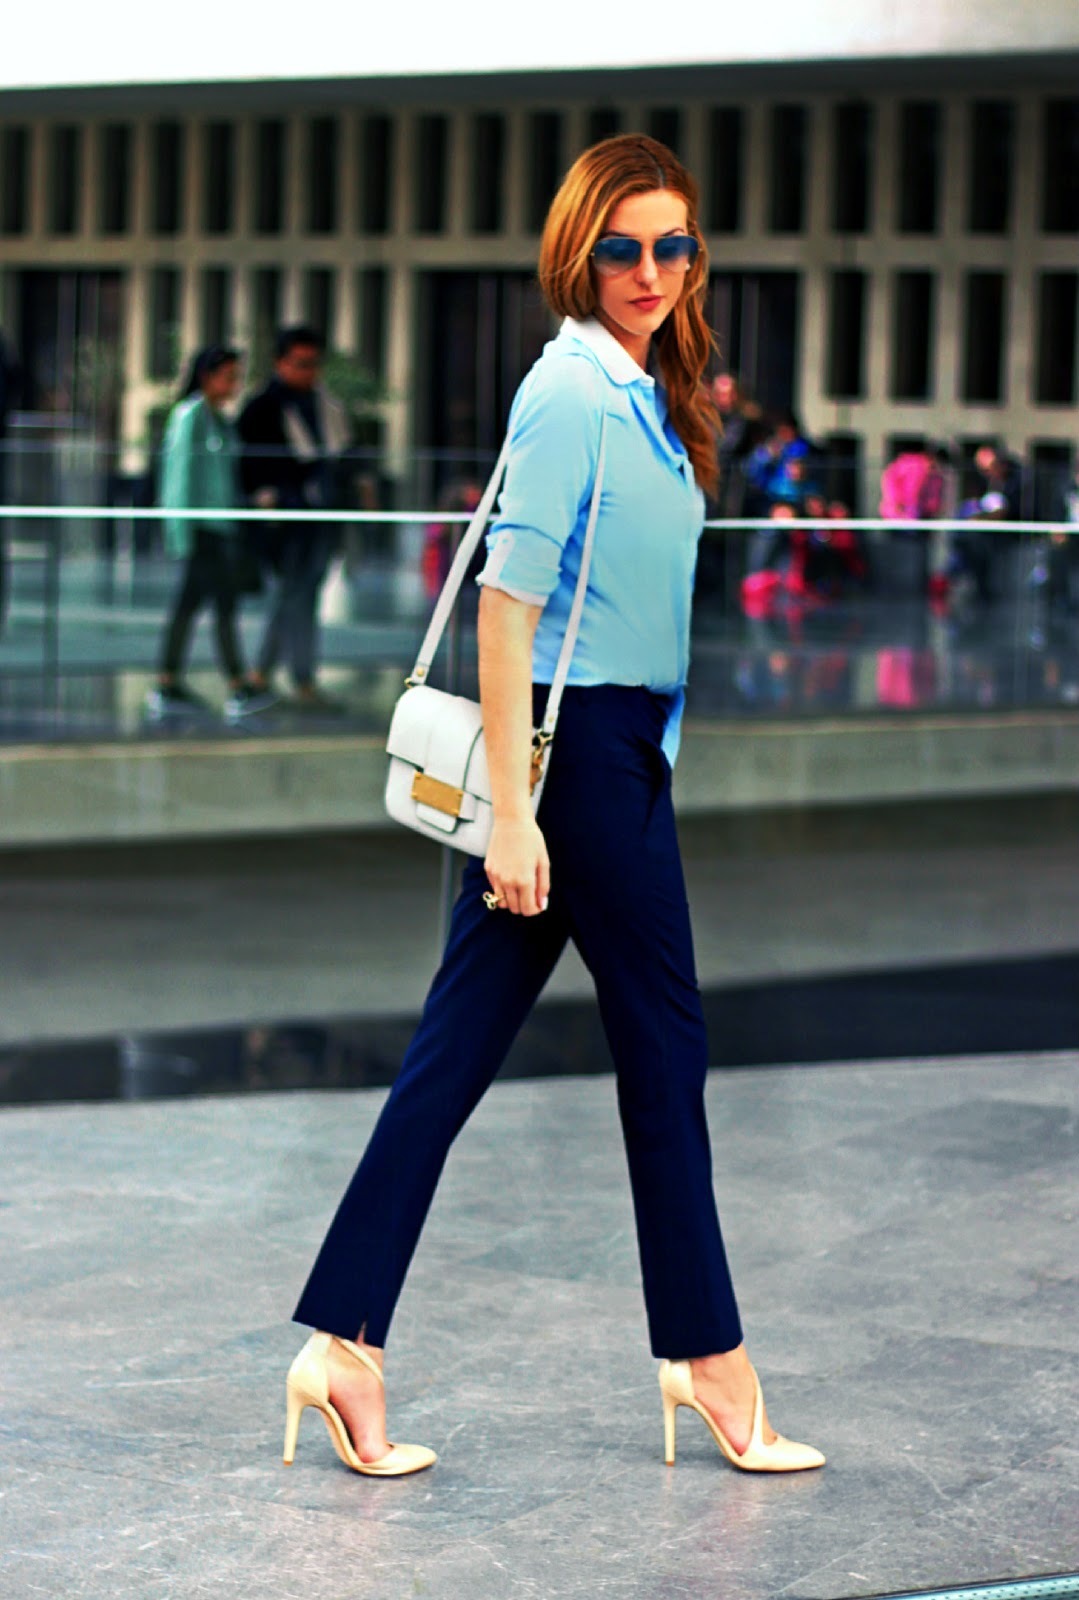 Navy Dress Pants with Light Blue Dress Shirt Outfits For Women (2 ideas &  outfits)